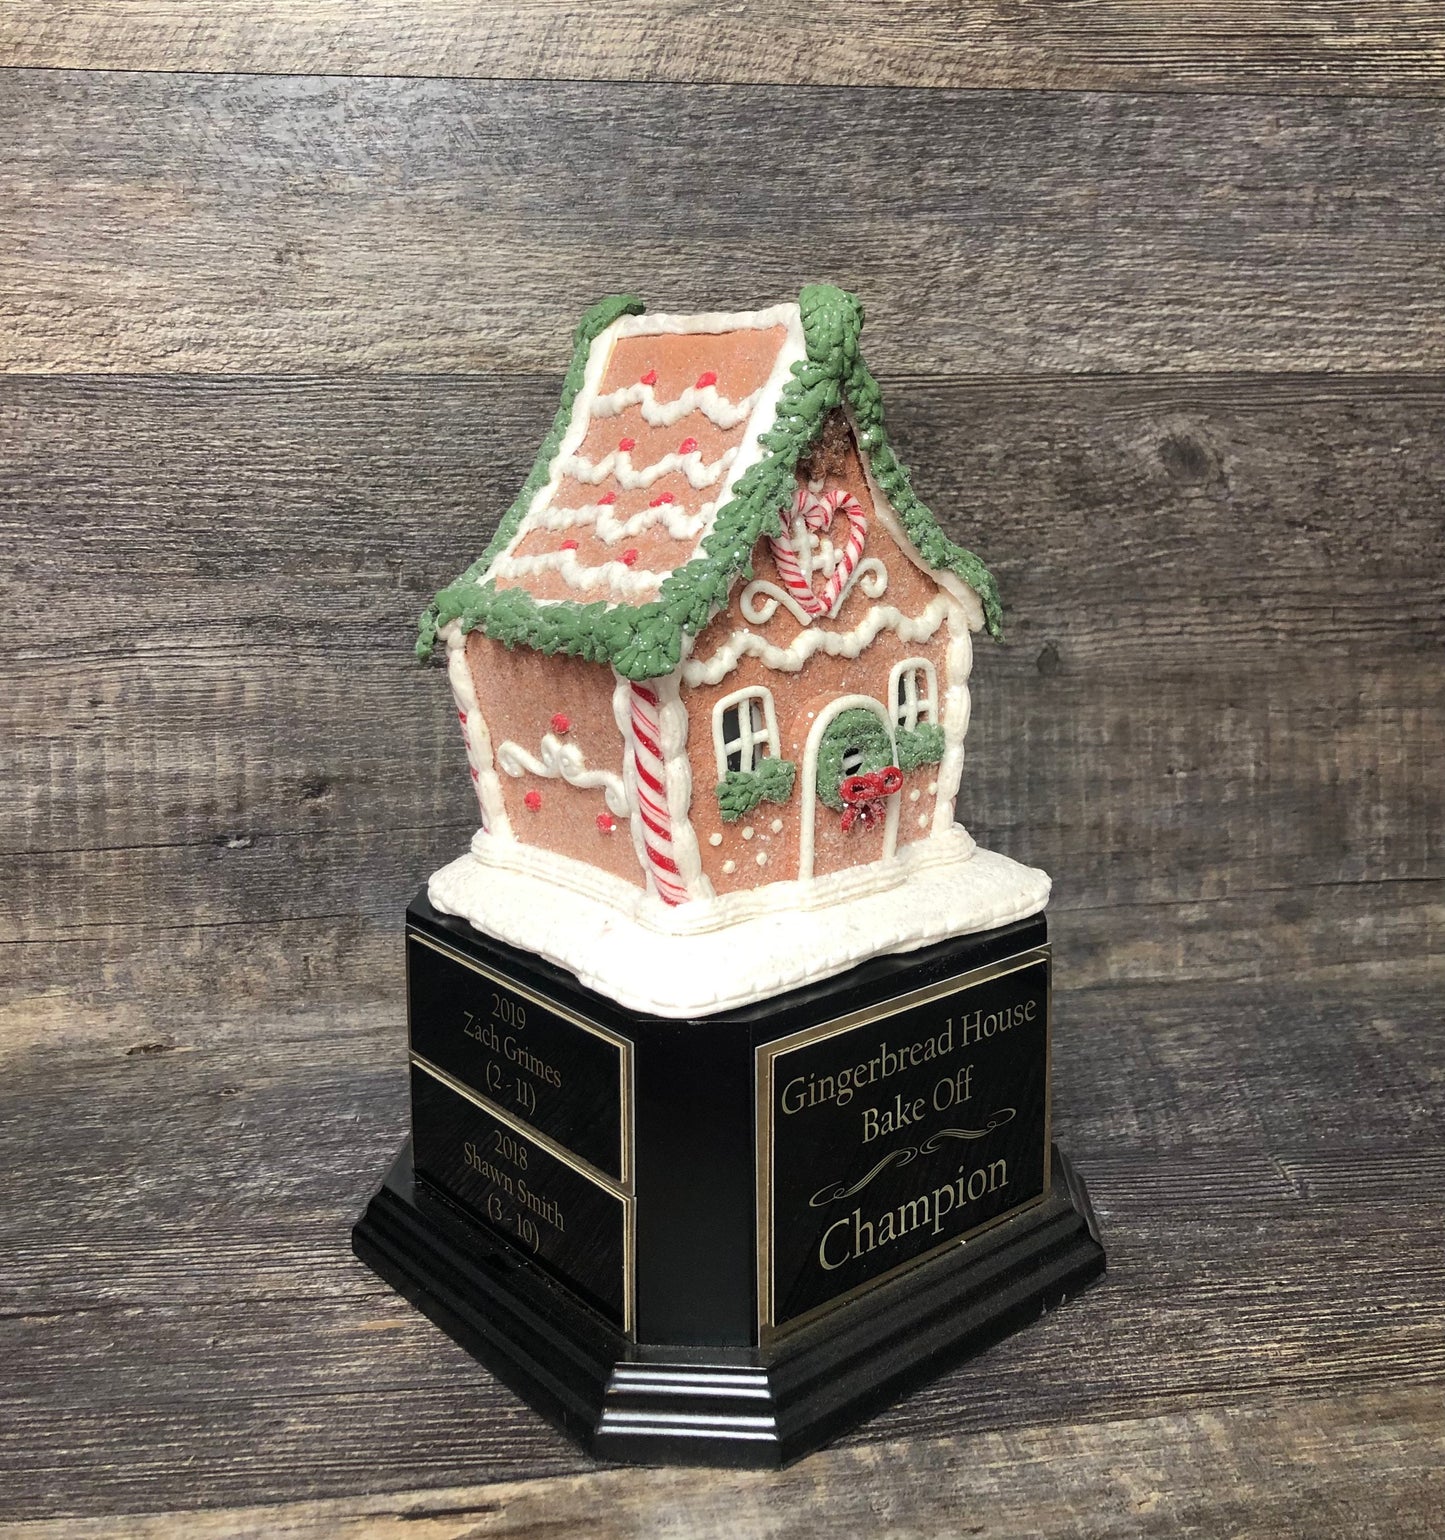 XL Gingerbread House Trophy Perpetual Christmas Cookie Decorating Bake Off Ugly Sweater Trophy Christmas Holiday Party Christmas Decor